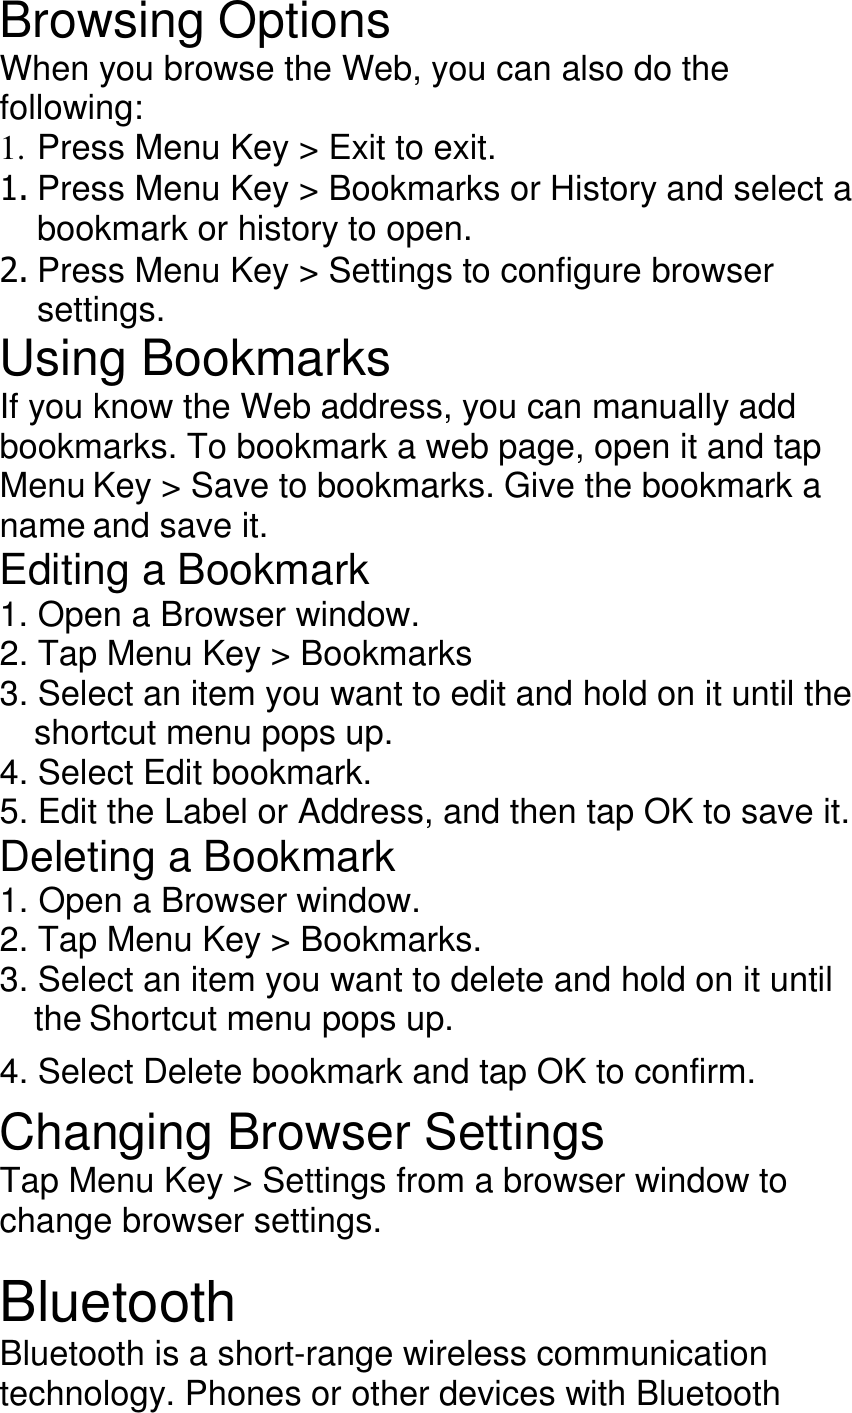 Browsing Options When you browse the Web, you can also do the following: 1. Press Menu Key &gt; Exit to exit. 1. Press Menu Key &gt; Bookmarks or History and select a bookmark or history to open. 2. Press Menu Key &gt; Settings to configure browser settings. Using Bookmarks If you know the Web address, you can manually add bookmarks. To bookmark a web page, open it and tap Menu Key &gt; Save to bookmarks. Give the bookmark a name and save it. Editing a Bookmark 1. Open a Browser window. 2. Tap Menu Key &gt; Bookmarks 3. Select an item you want to edit and hold on it until the shortcut menu pops up. 4. Select Edit bookmark. 5. Edit the Label or Address, and then tap OK to save it. Deleting a Bookmark 1. Open a Browser window. 2. Tap Menu Key &gt; Bookmarks. 3. Select an item you want to delete and hold on it until the Shortcut menu pops up. 4. Select Delete bookmark and tap OK to confirm. Changing Browser Settings Tap Menu Key &gt; Settings from a browser window to change browser settings.  Bluetooth Bluetooth is a short-range wireless communication technology. Phones or other devices with Bluetooth 